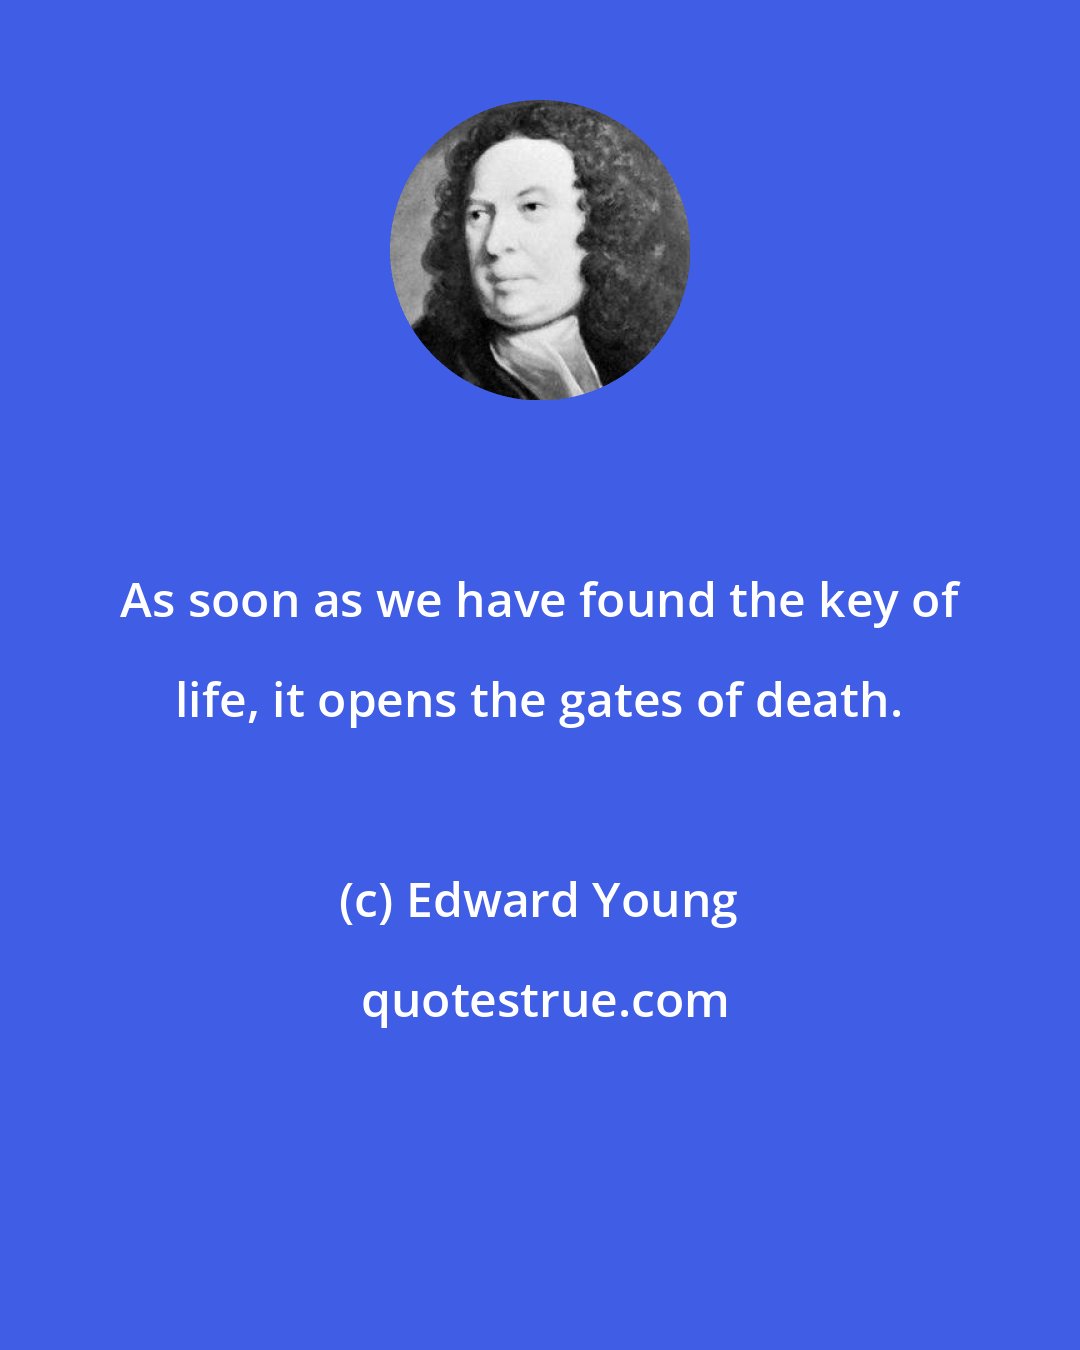 Edward Young: As soon as we have found the key of life, it opens the gates of death.